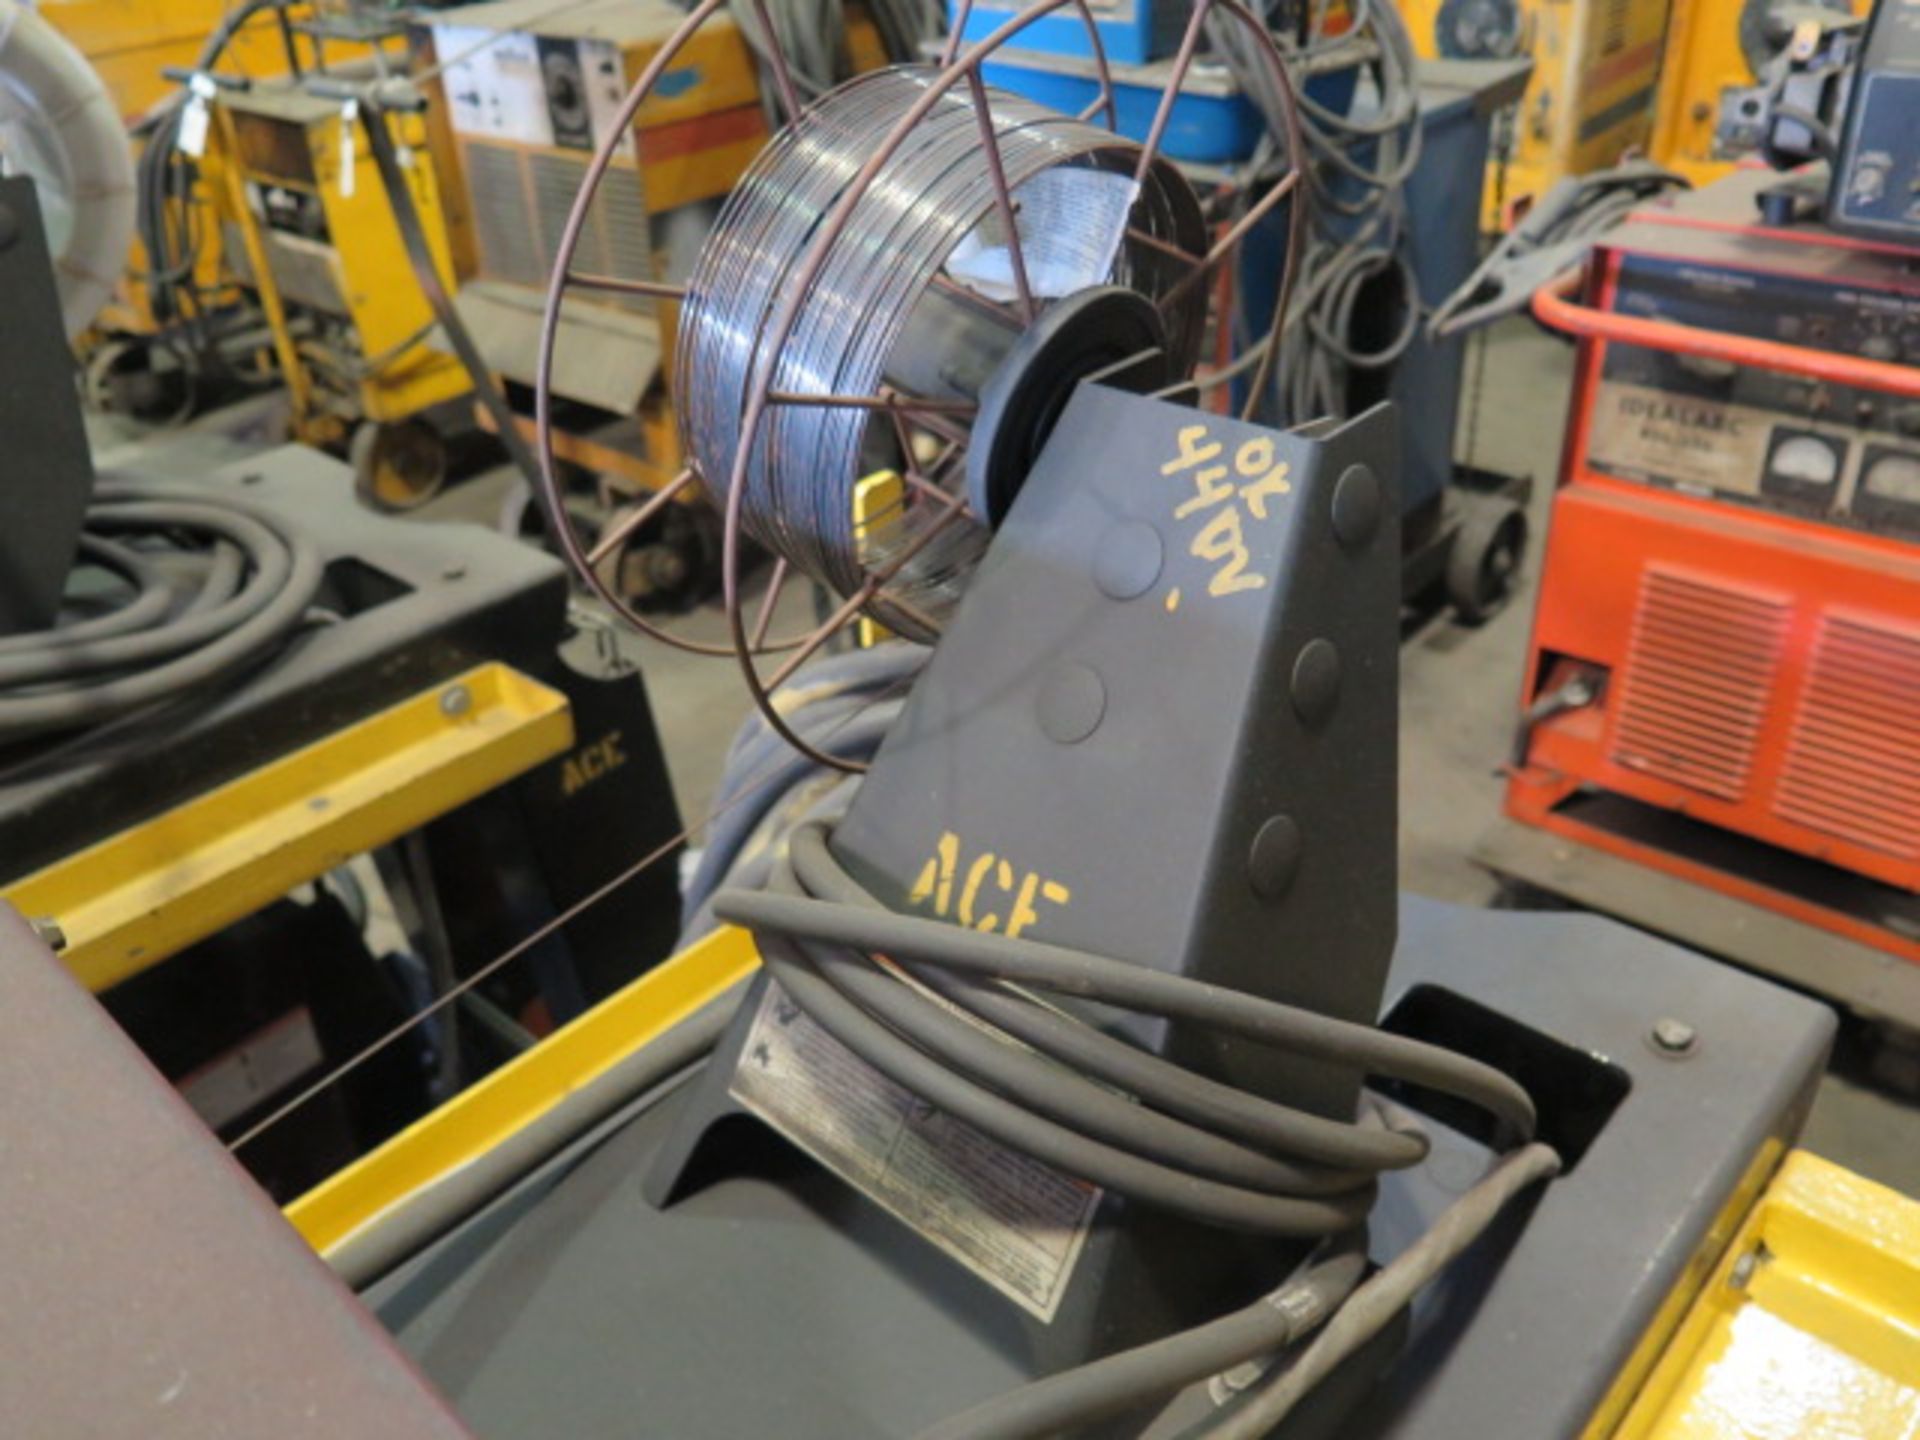 Thermal Arc 400MST Arc Welding Power Source w/ VA2000 Wire Feed (SOLD AS-IS - NO WARRANTY) - Image 8 of 10